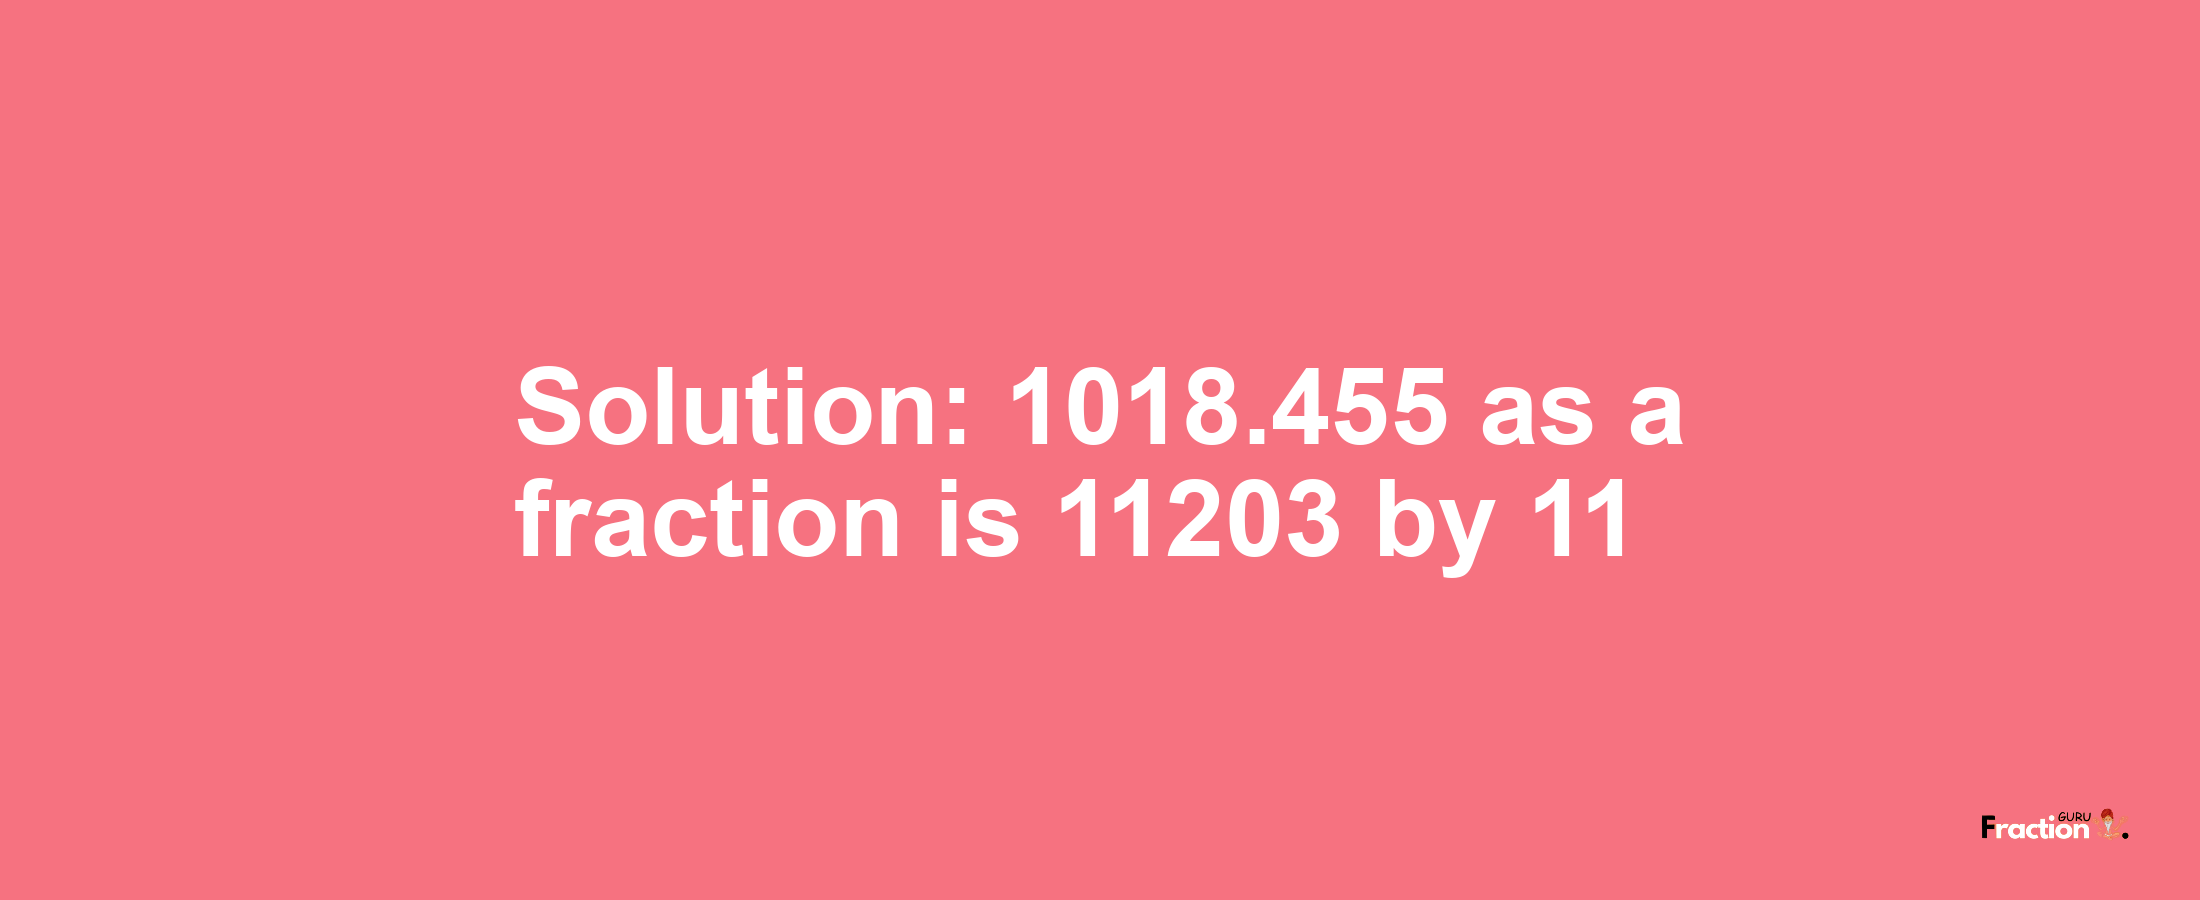 Solution:1018.455 as a fraction is 11203/11